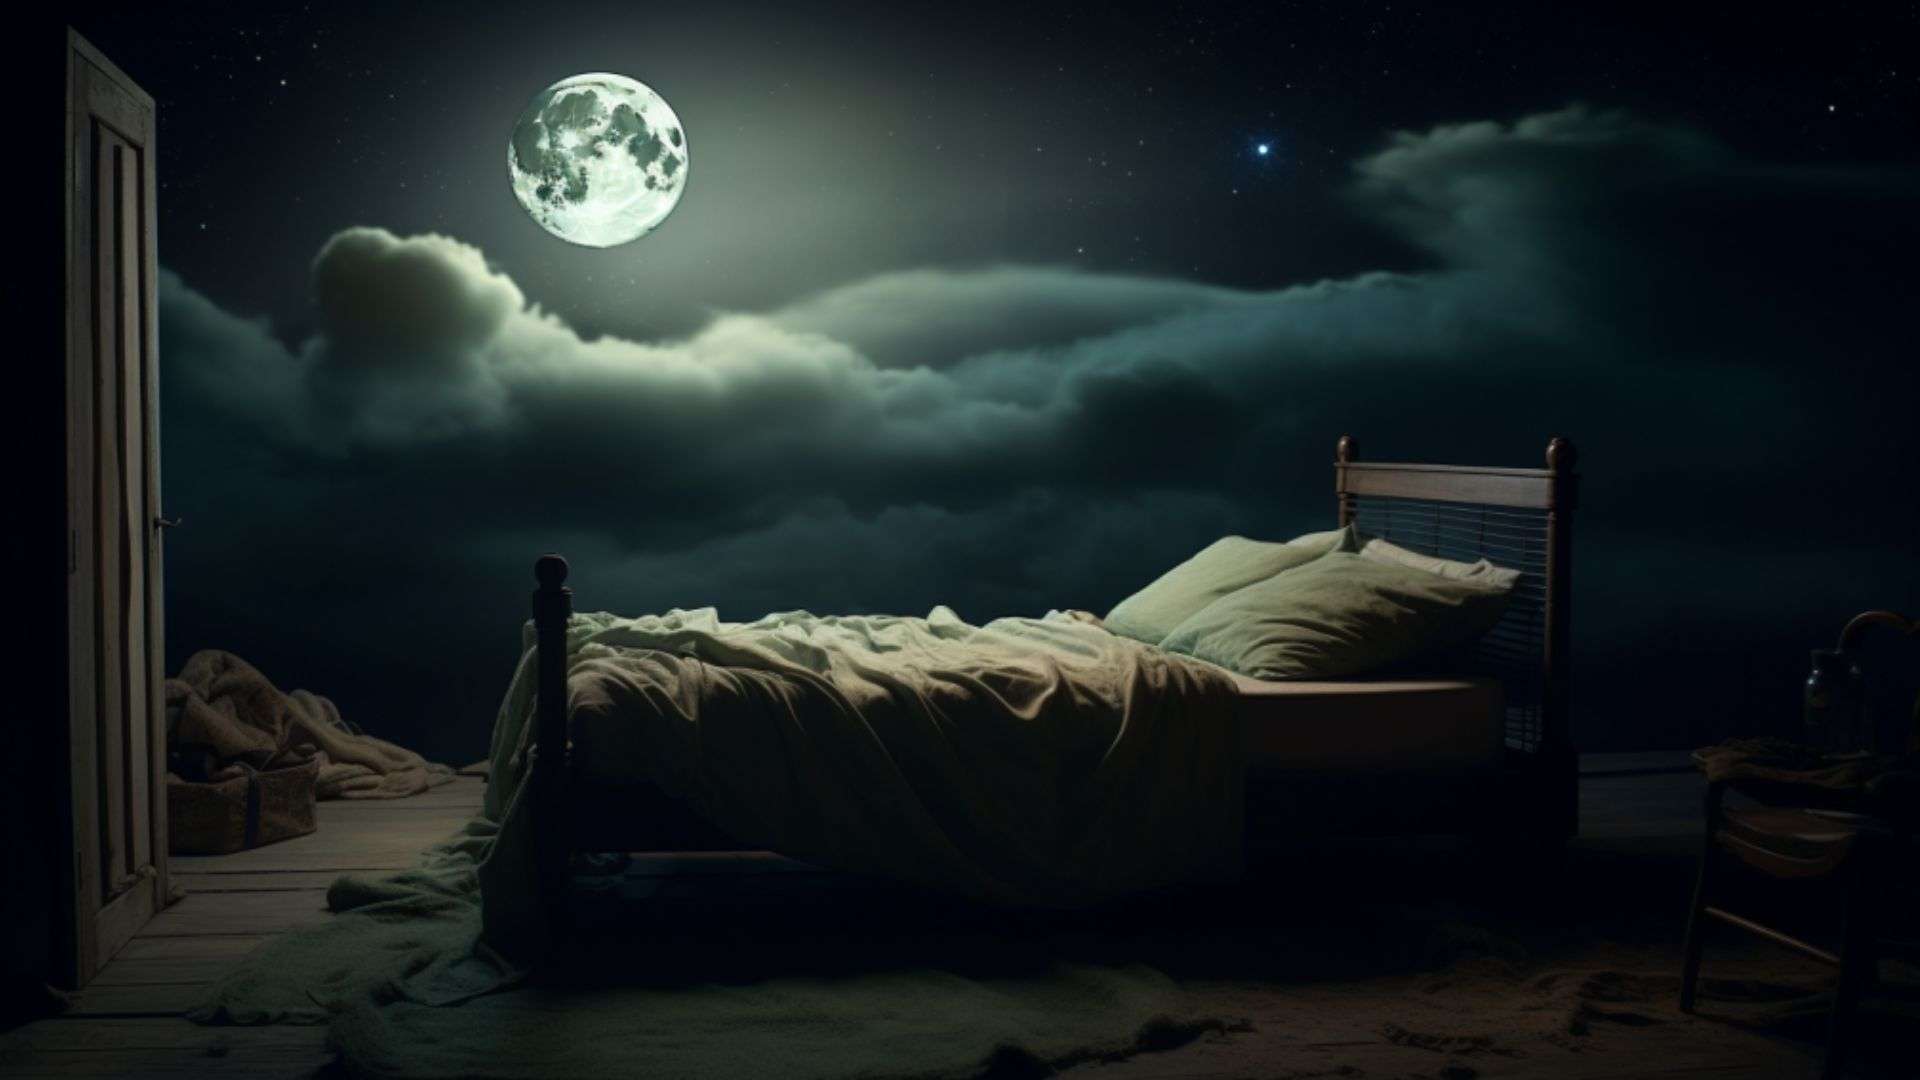 A visual representation of the intriguing connection between lucid dreaming and the phenomenon of sleep paralysis, definitely answering the question can lucid dreams cause sleep paralysis.